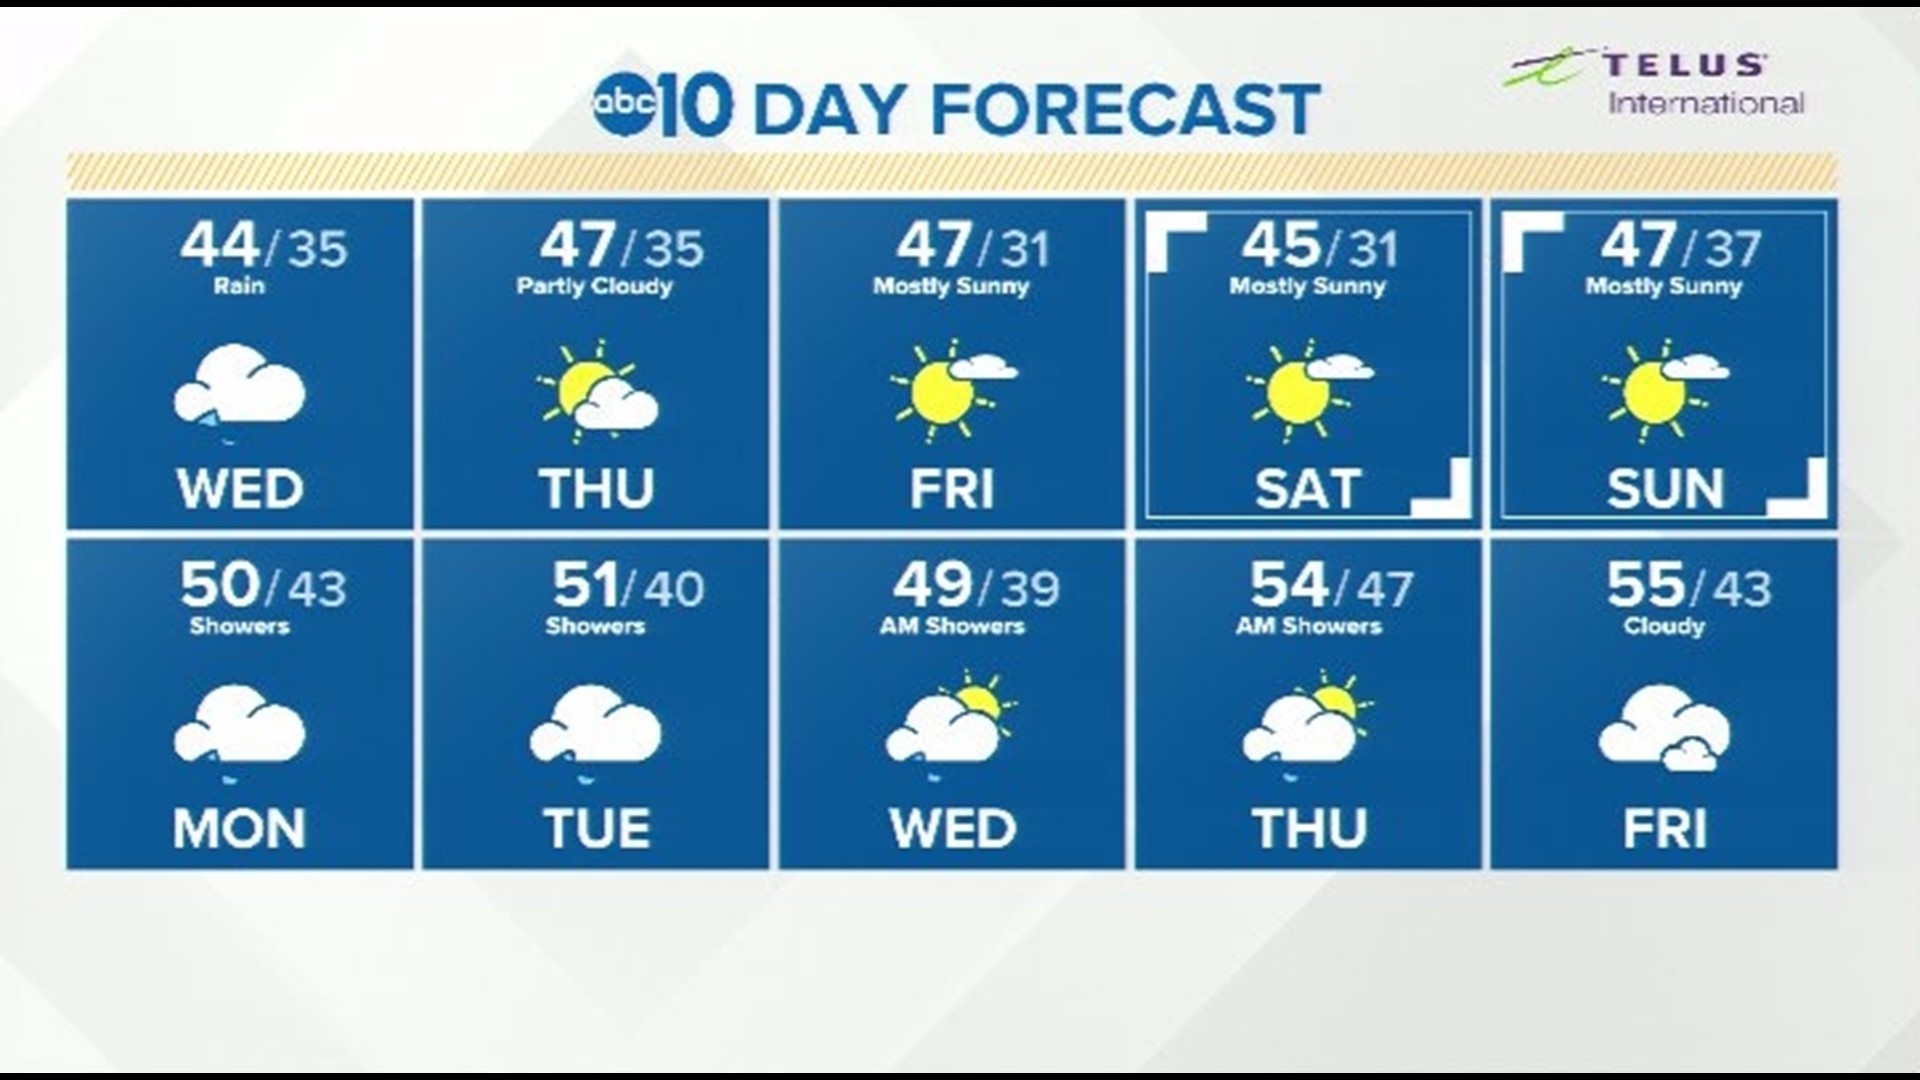 Brittany Begley shows us what the next 10 days of weather will look like.